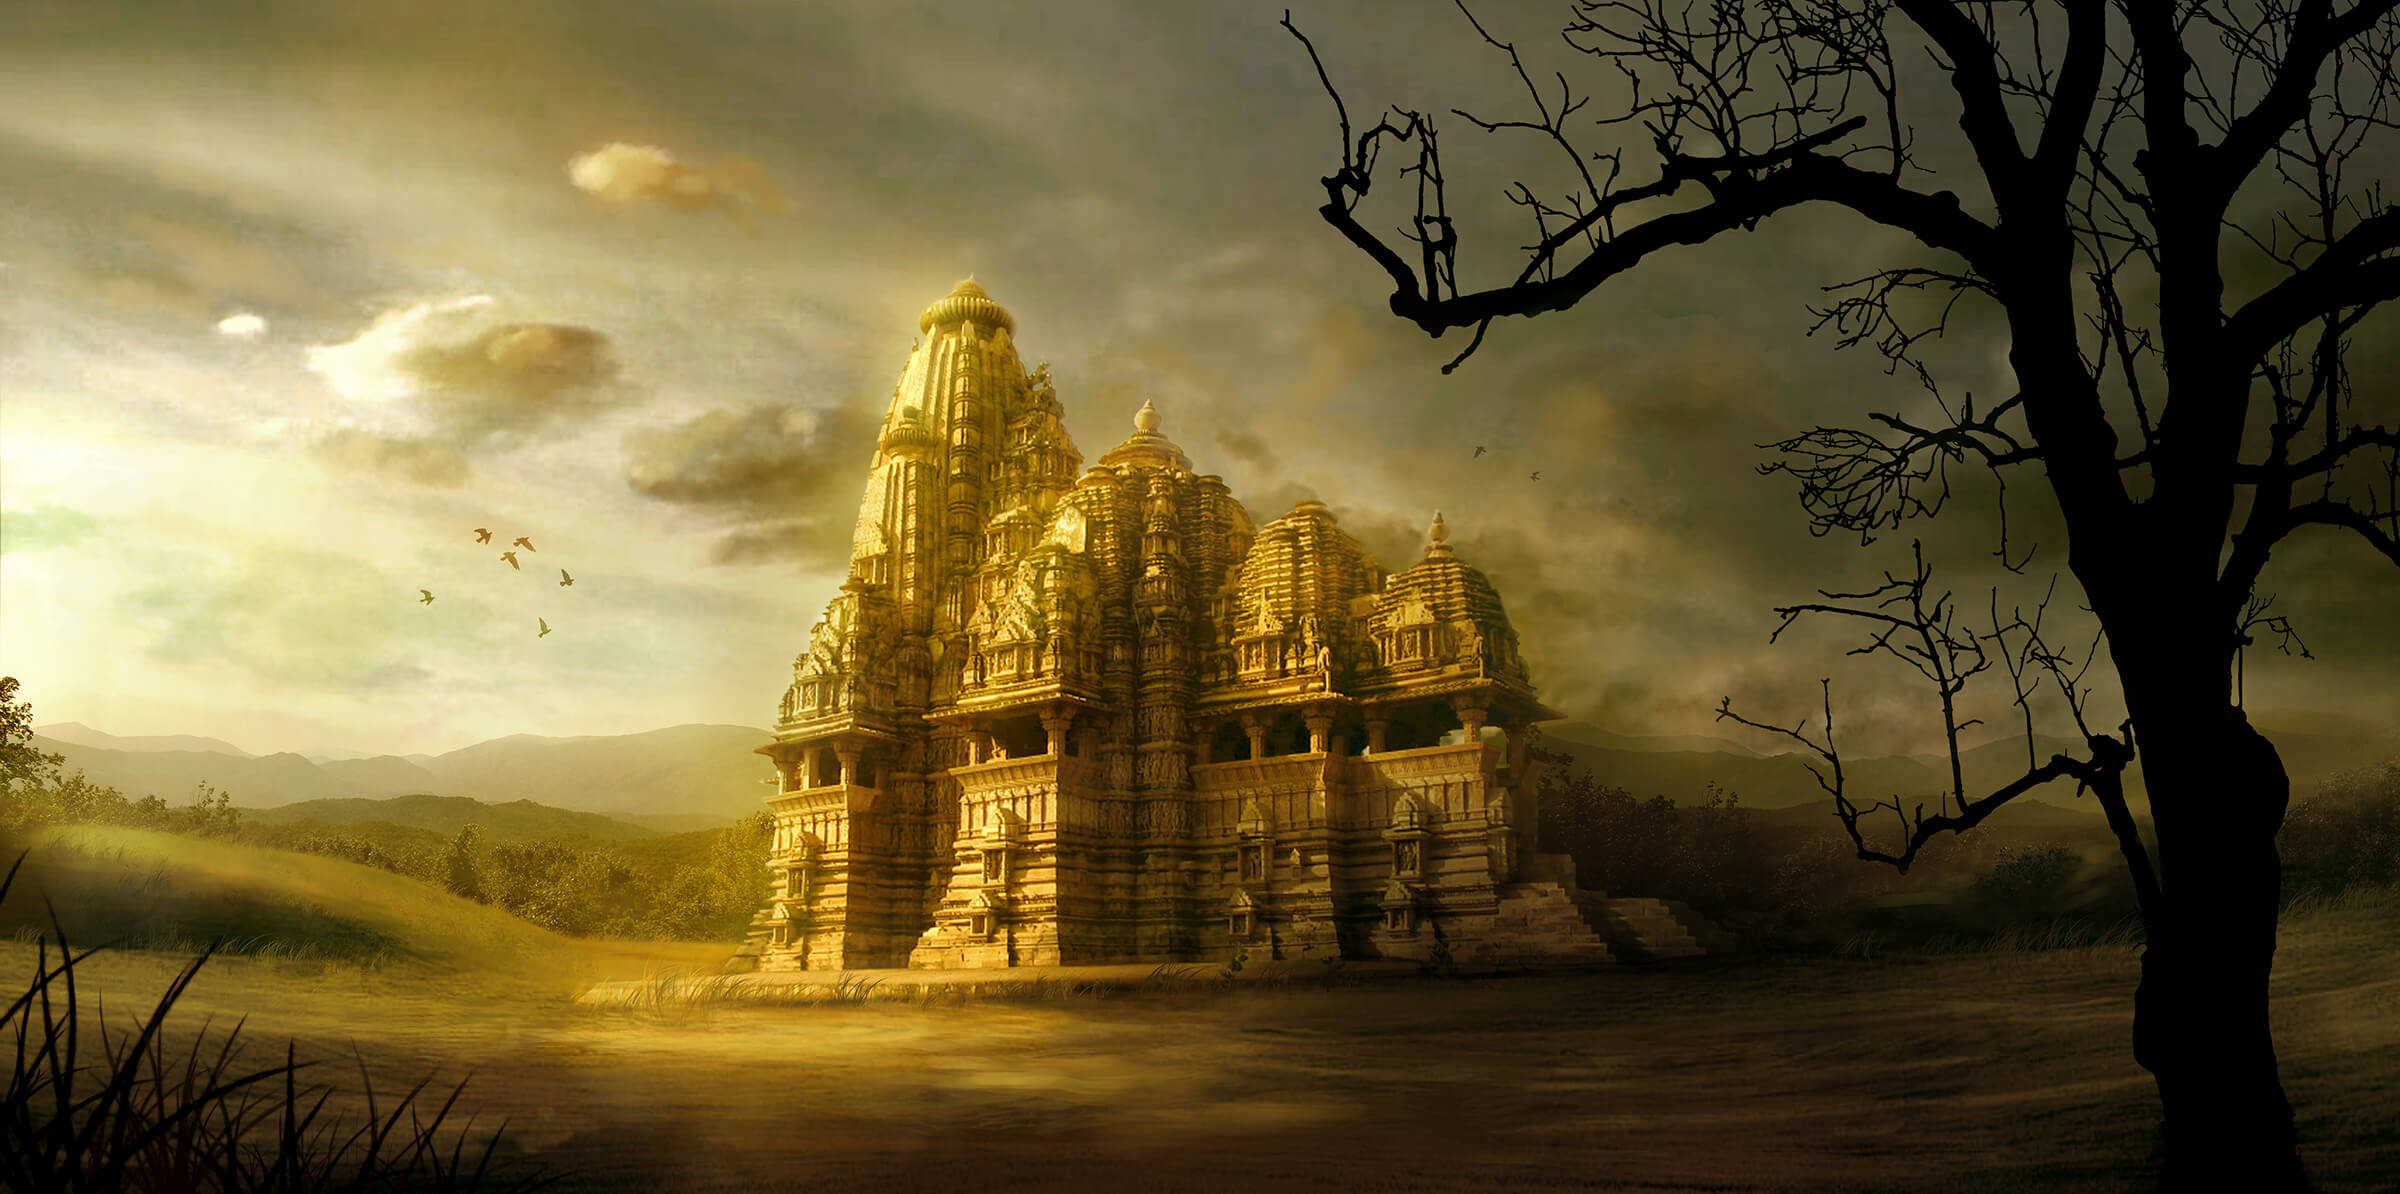 An ornate, abandoned stone temple standing in a grassy clearing, glowing gold in the sunlight.